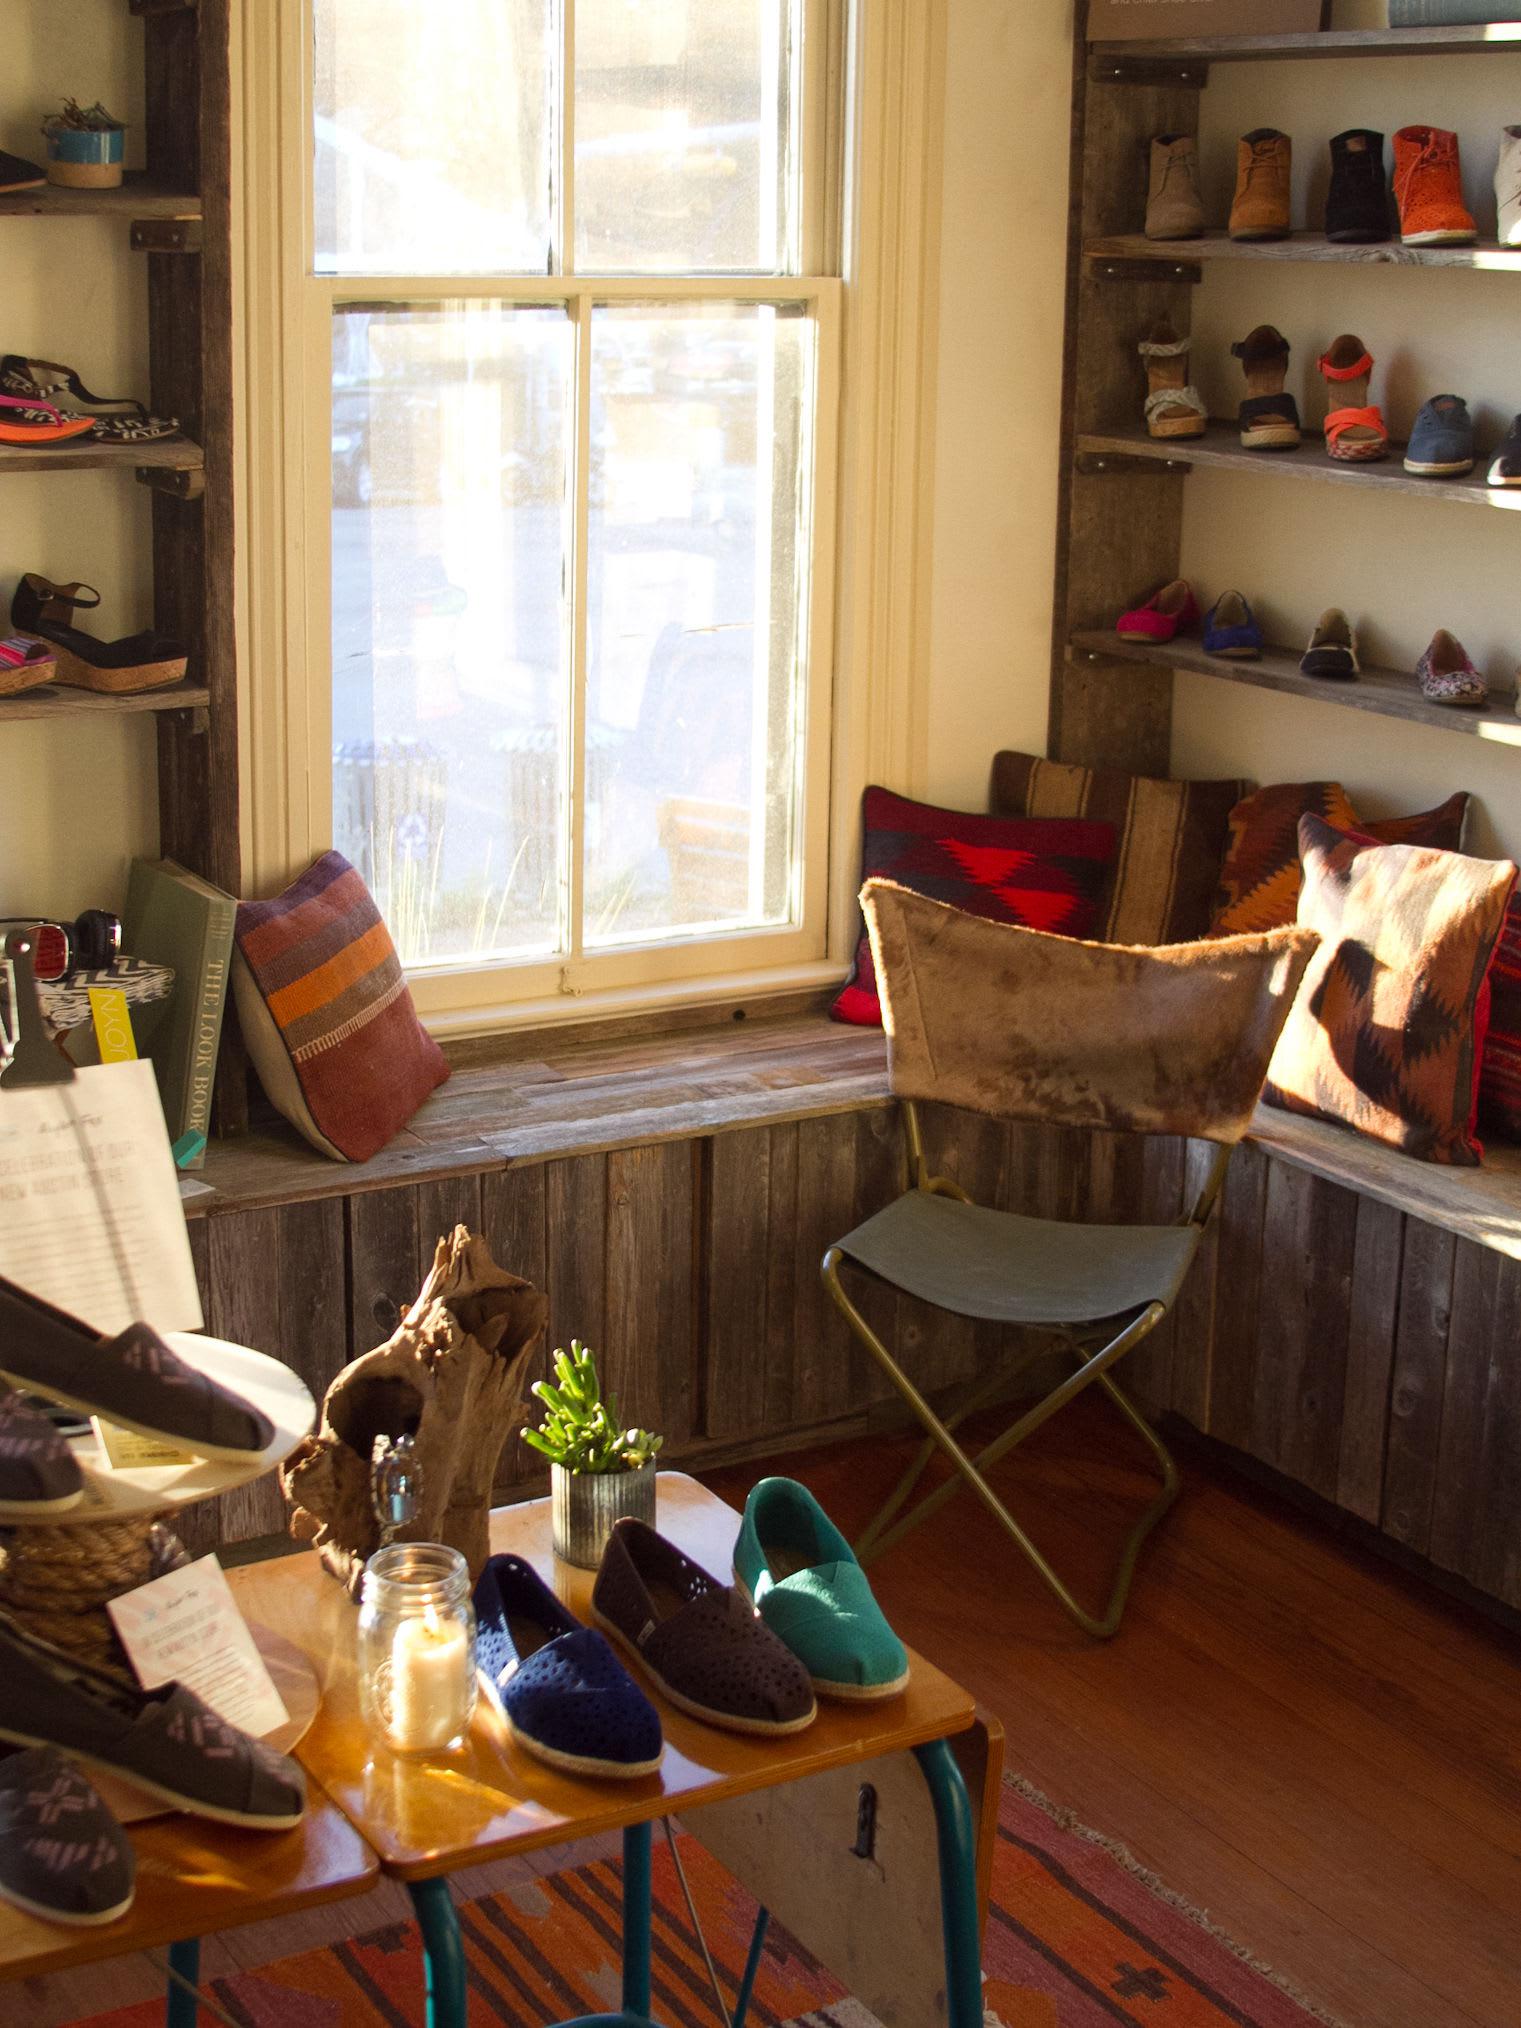 Step inside the new TOMS store, now open on South Congress - CultureMap